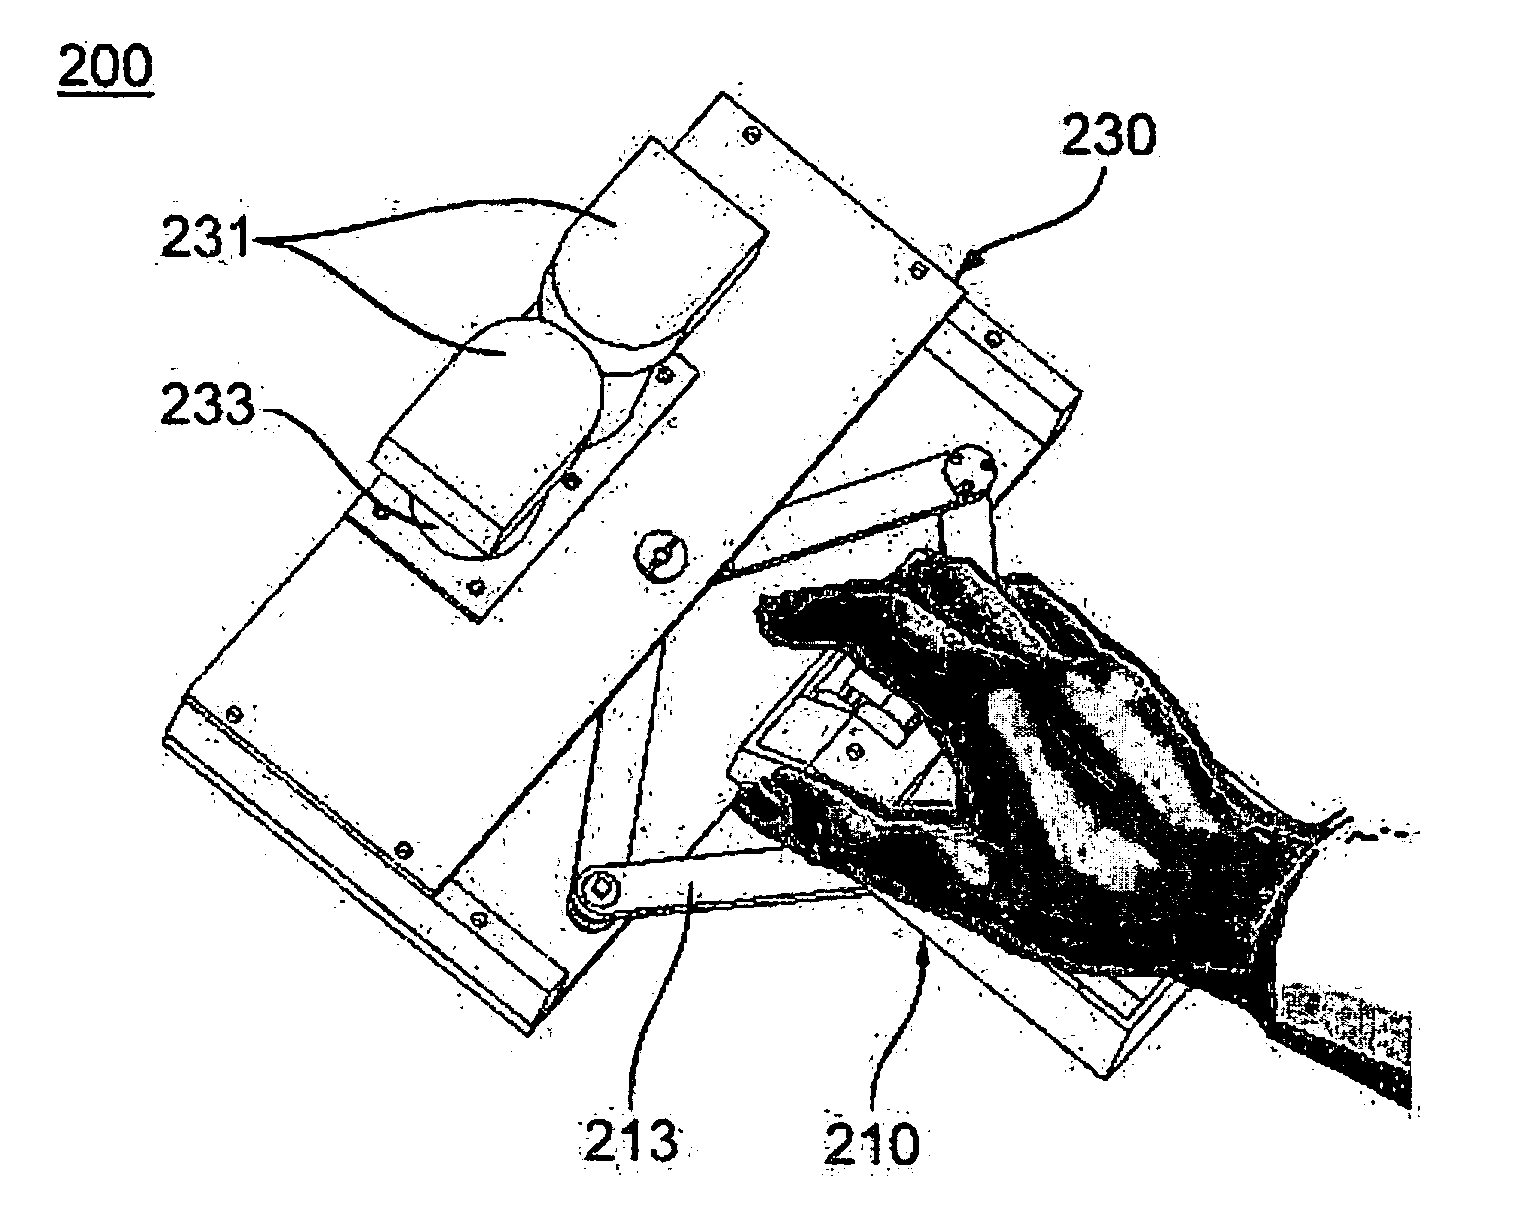 Mouse interface system capable of providing thermal feedback